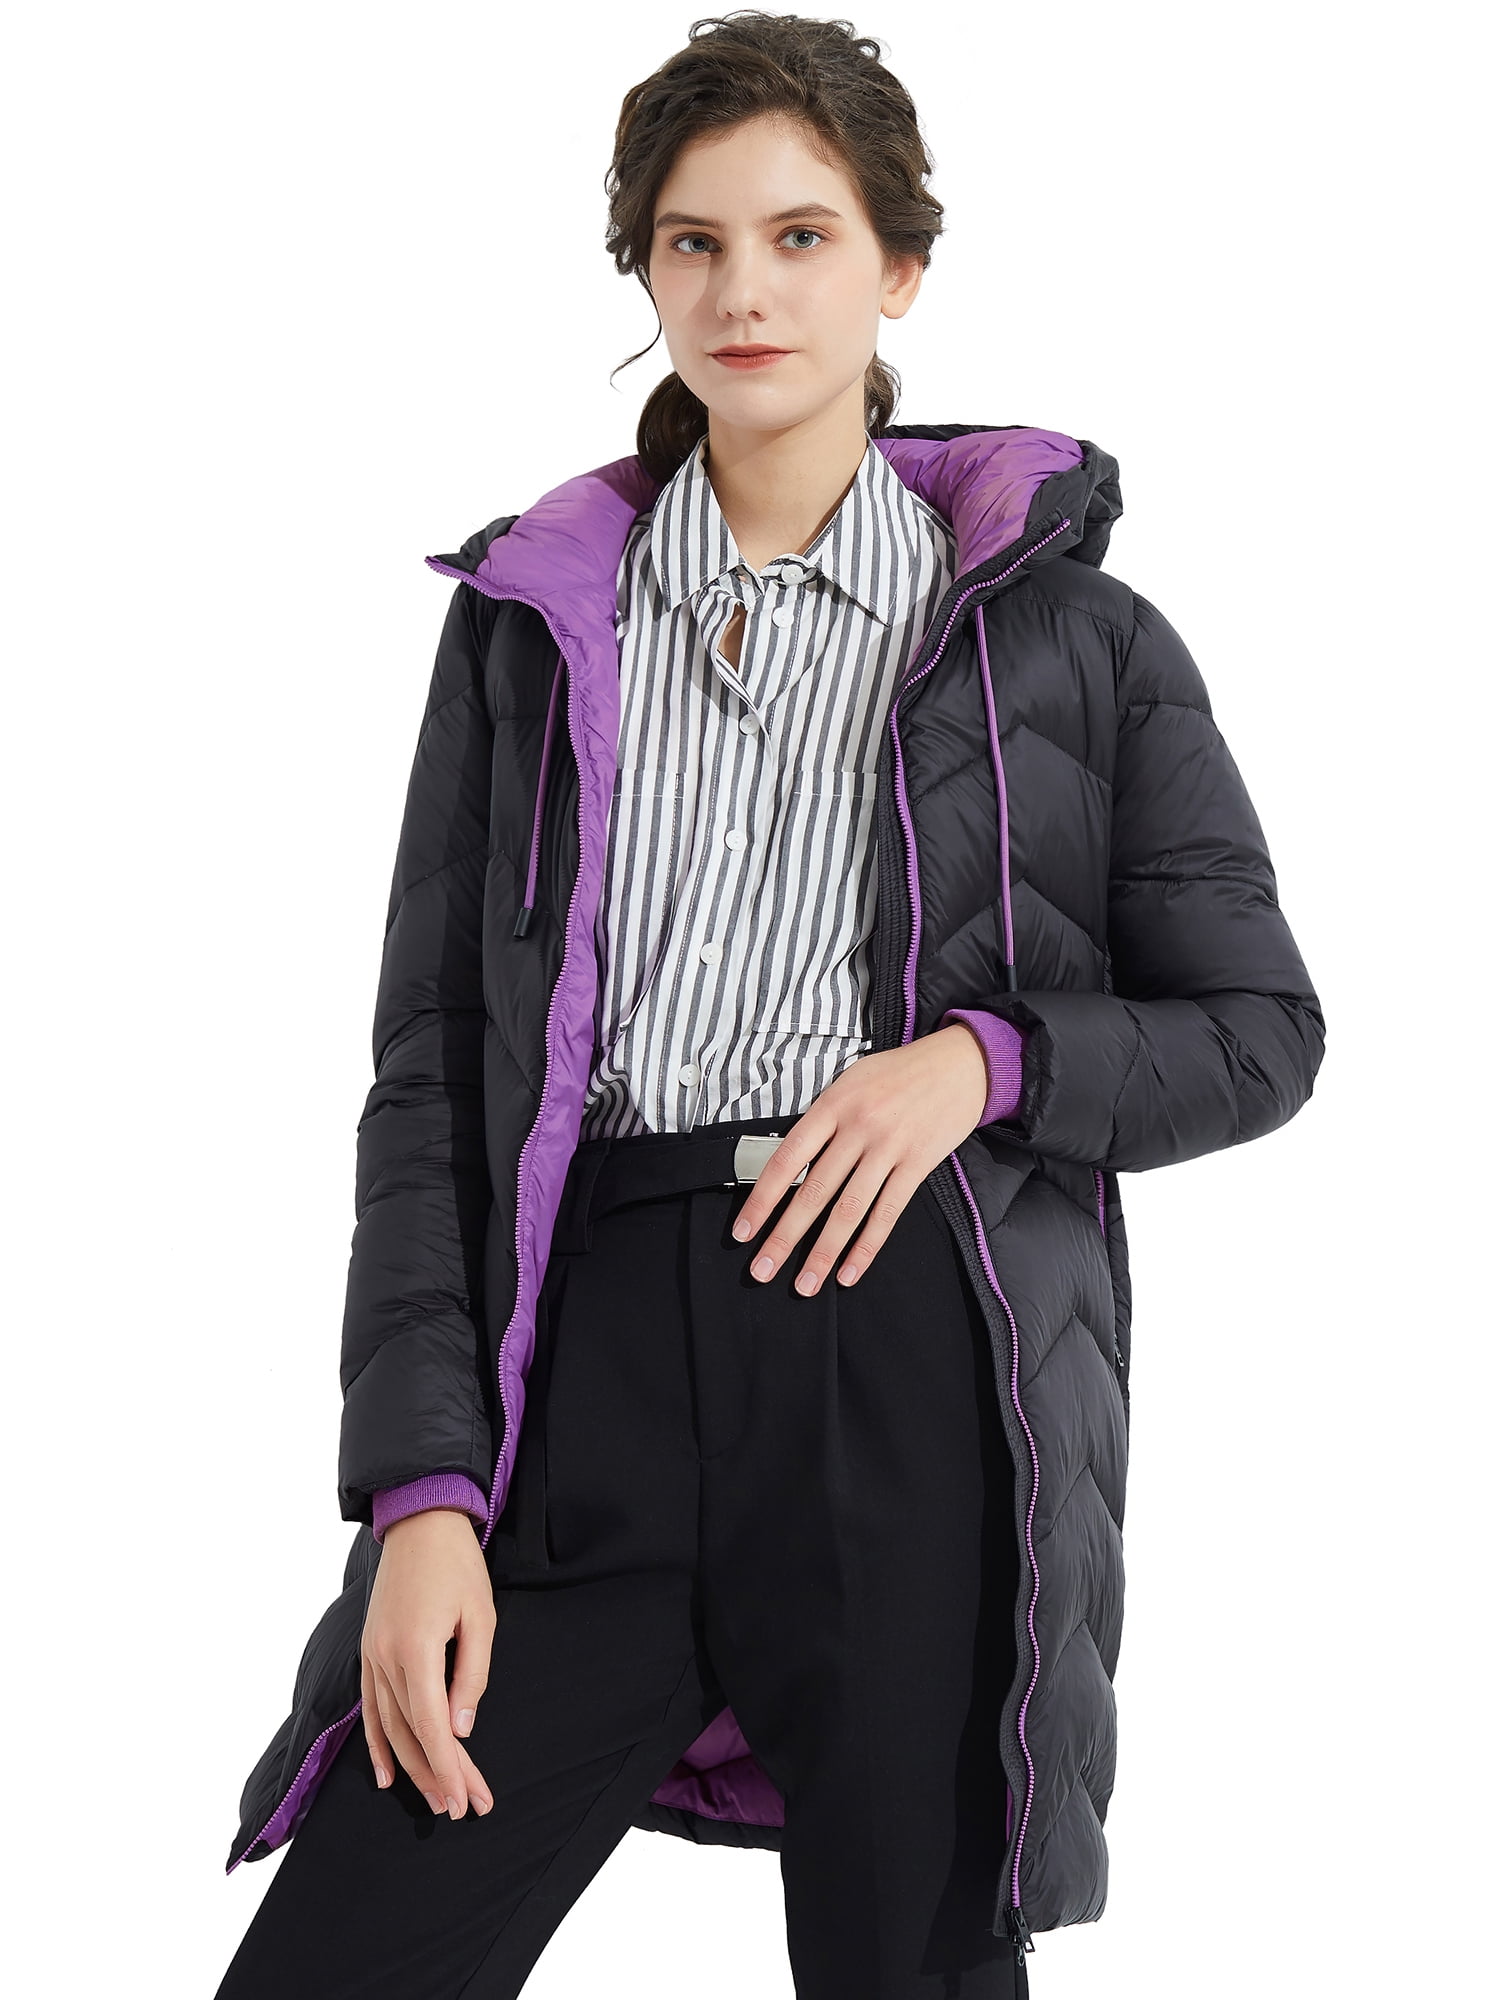 Womens Lightweight Packable Down Coat Puffer Jacket Hooded Winter Jacket with Removable Hood Not for Big Women 